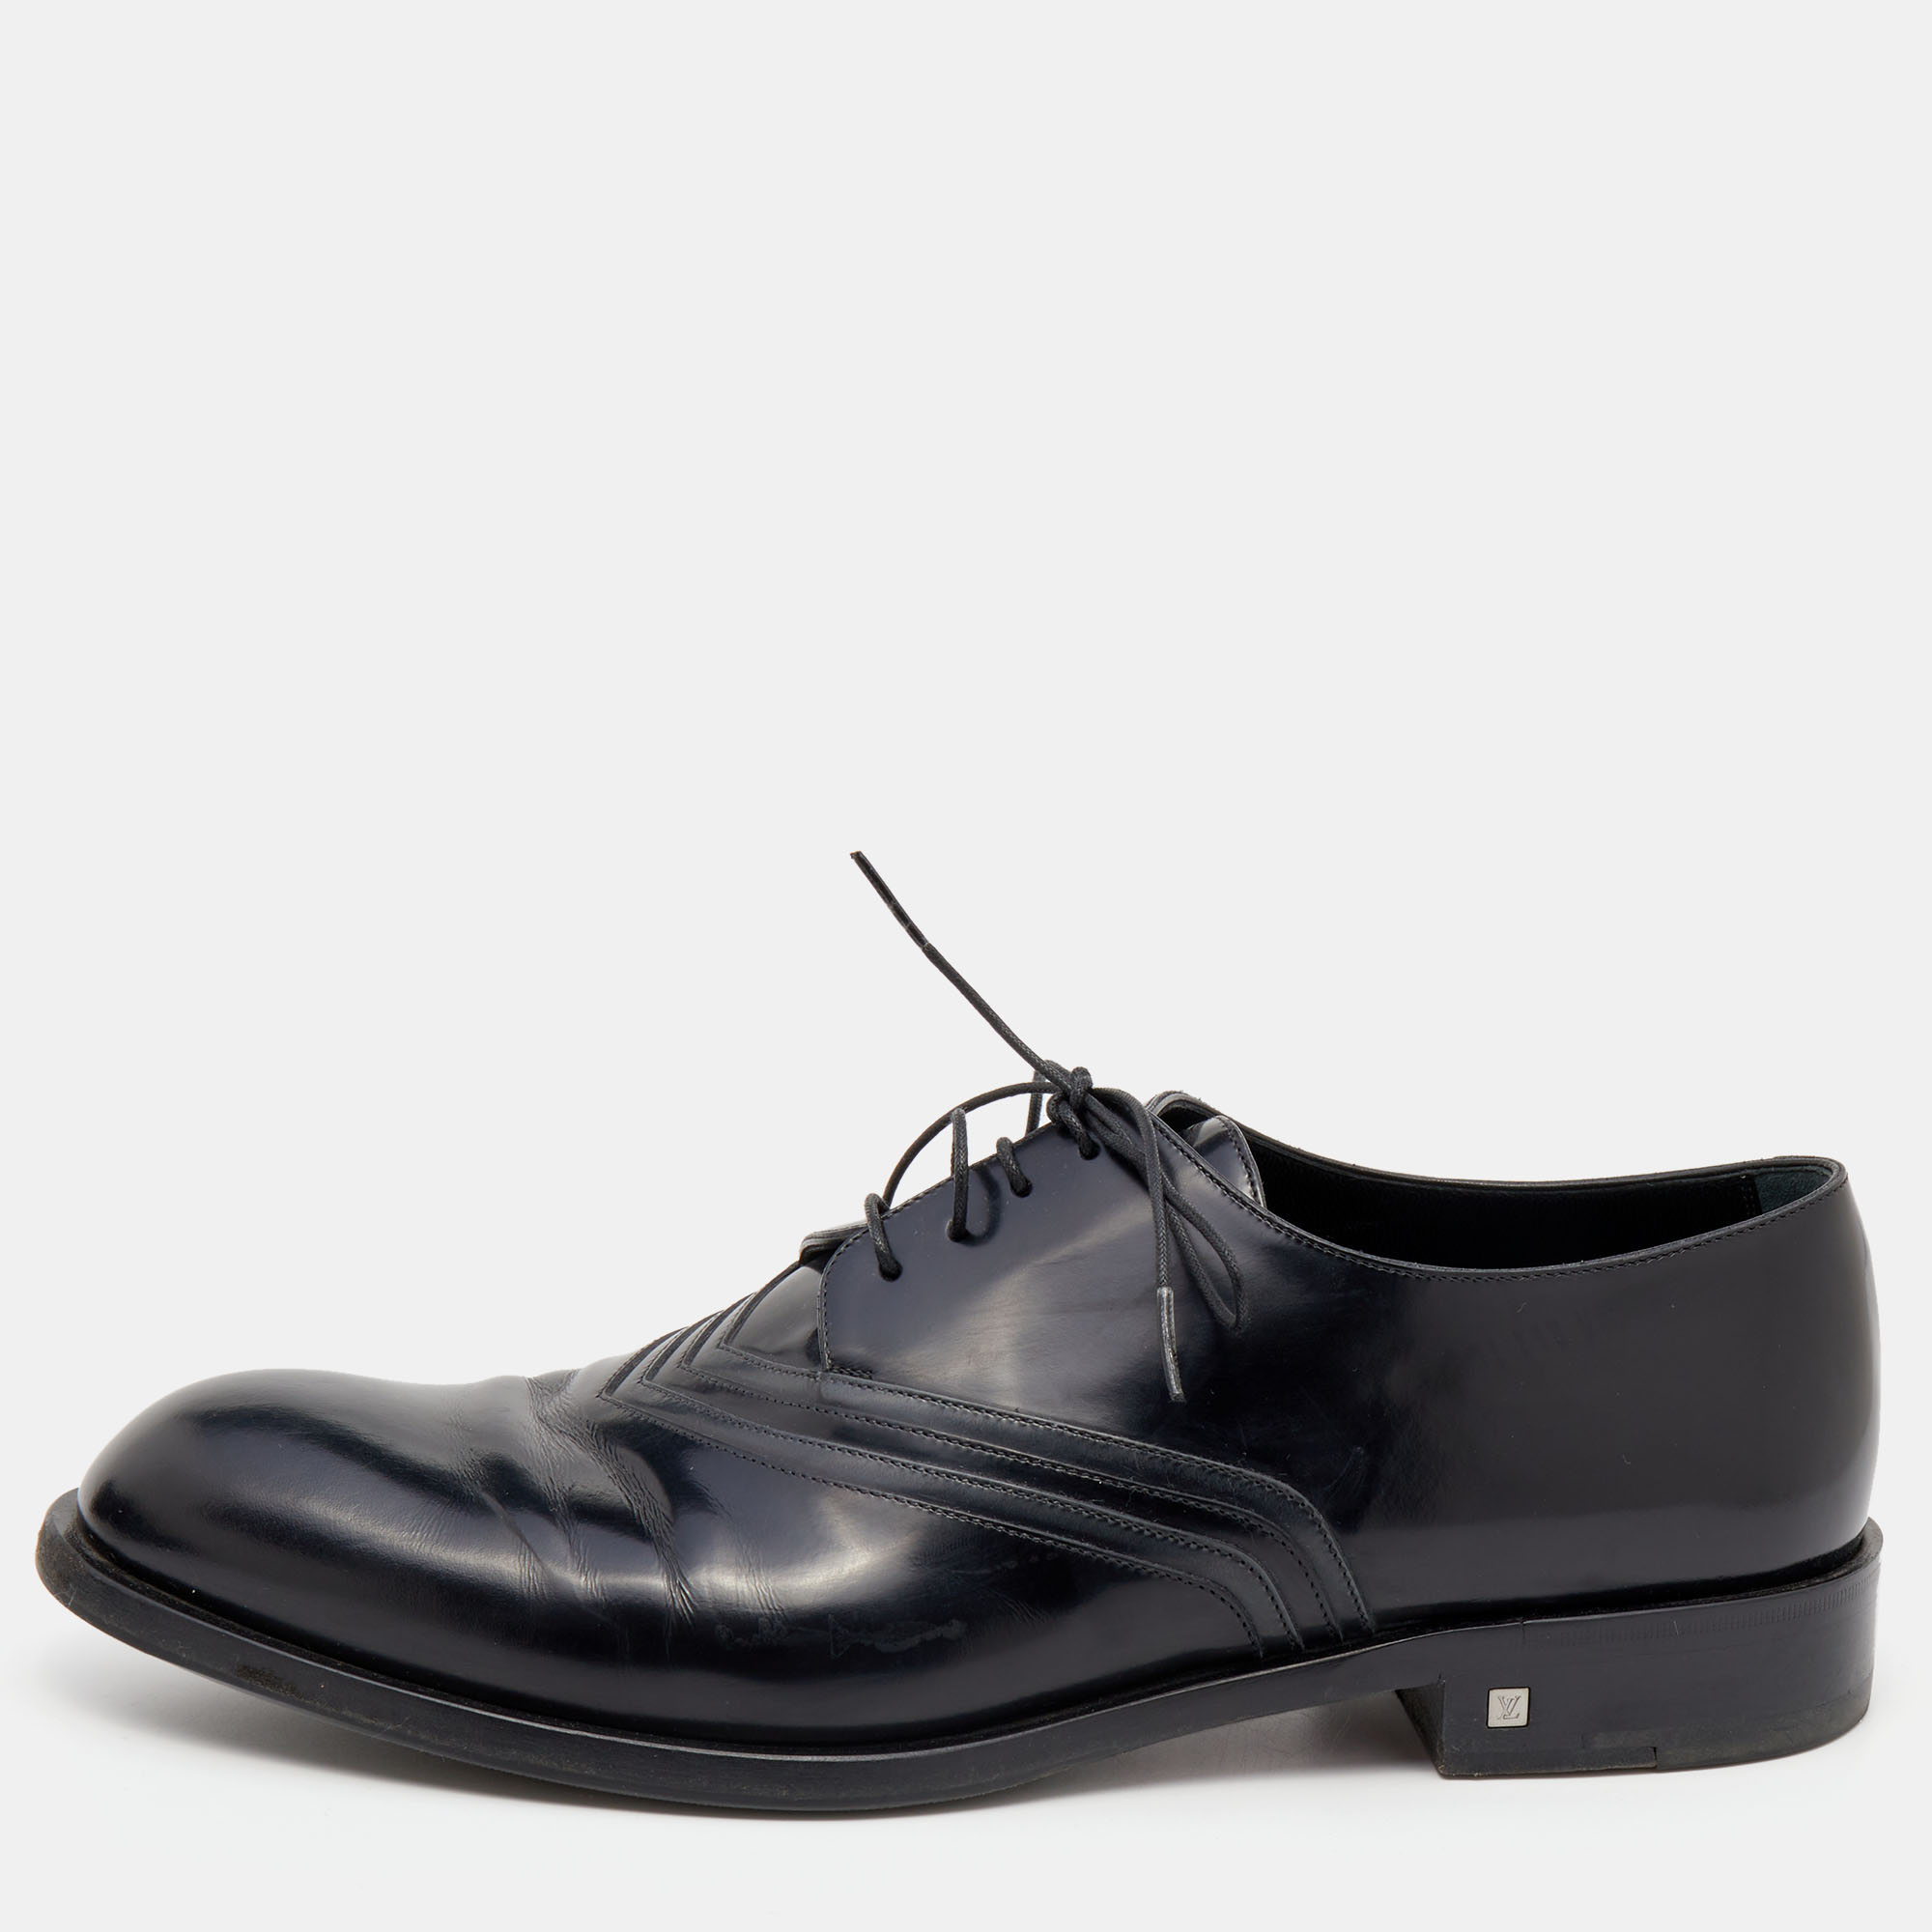 Pre-owned Louis Vuitton Black Leather Lace Up Oxford Size 43